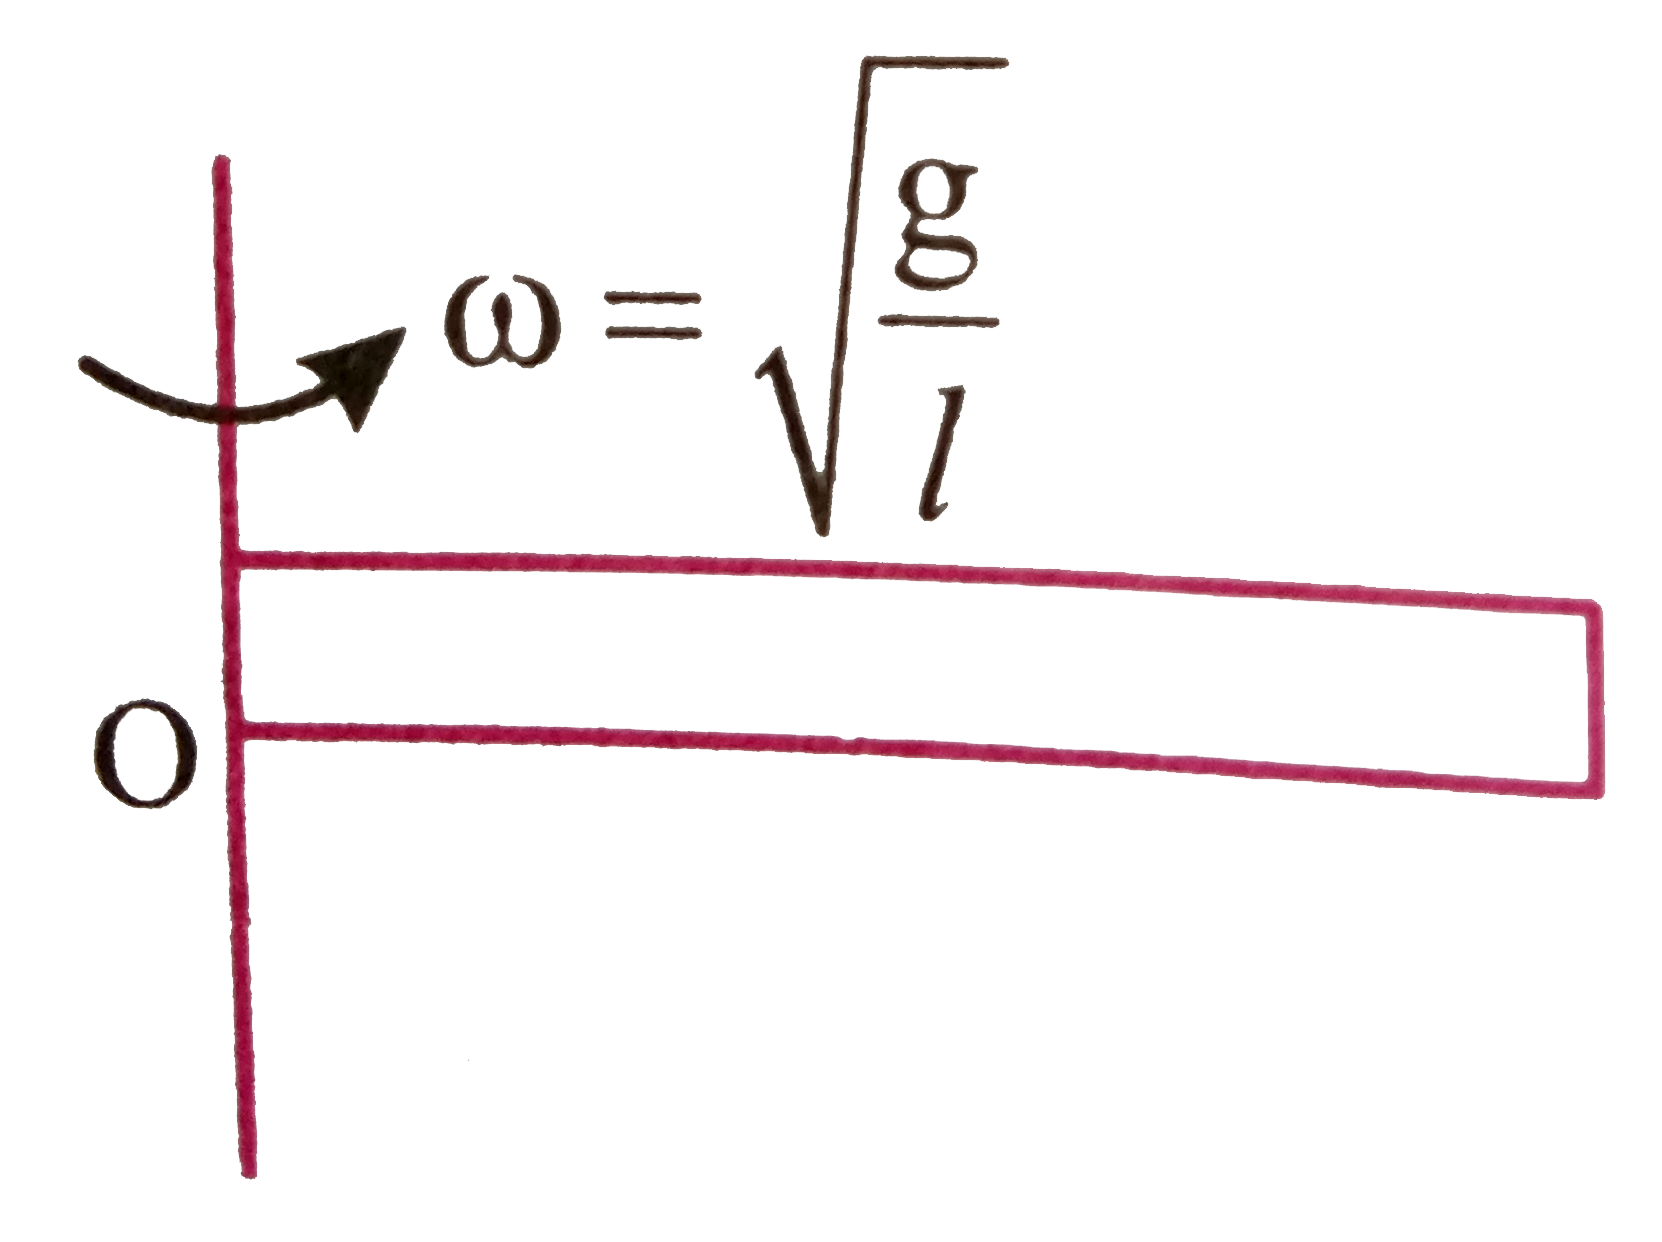 The KE and moment of inertia about the given end point of a rod of mass m and length l and cross sectional area A which is rotating with omega=sqrt(g/l) as shown in figure. Will be [density of the rod varies as rho=rho(0)(1+x/l),x is the distance measured from O)n ]